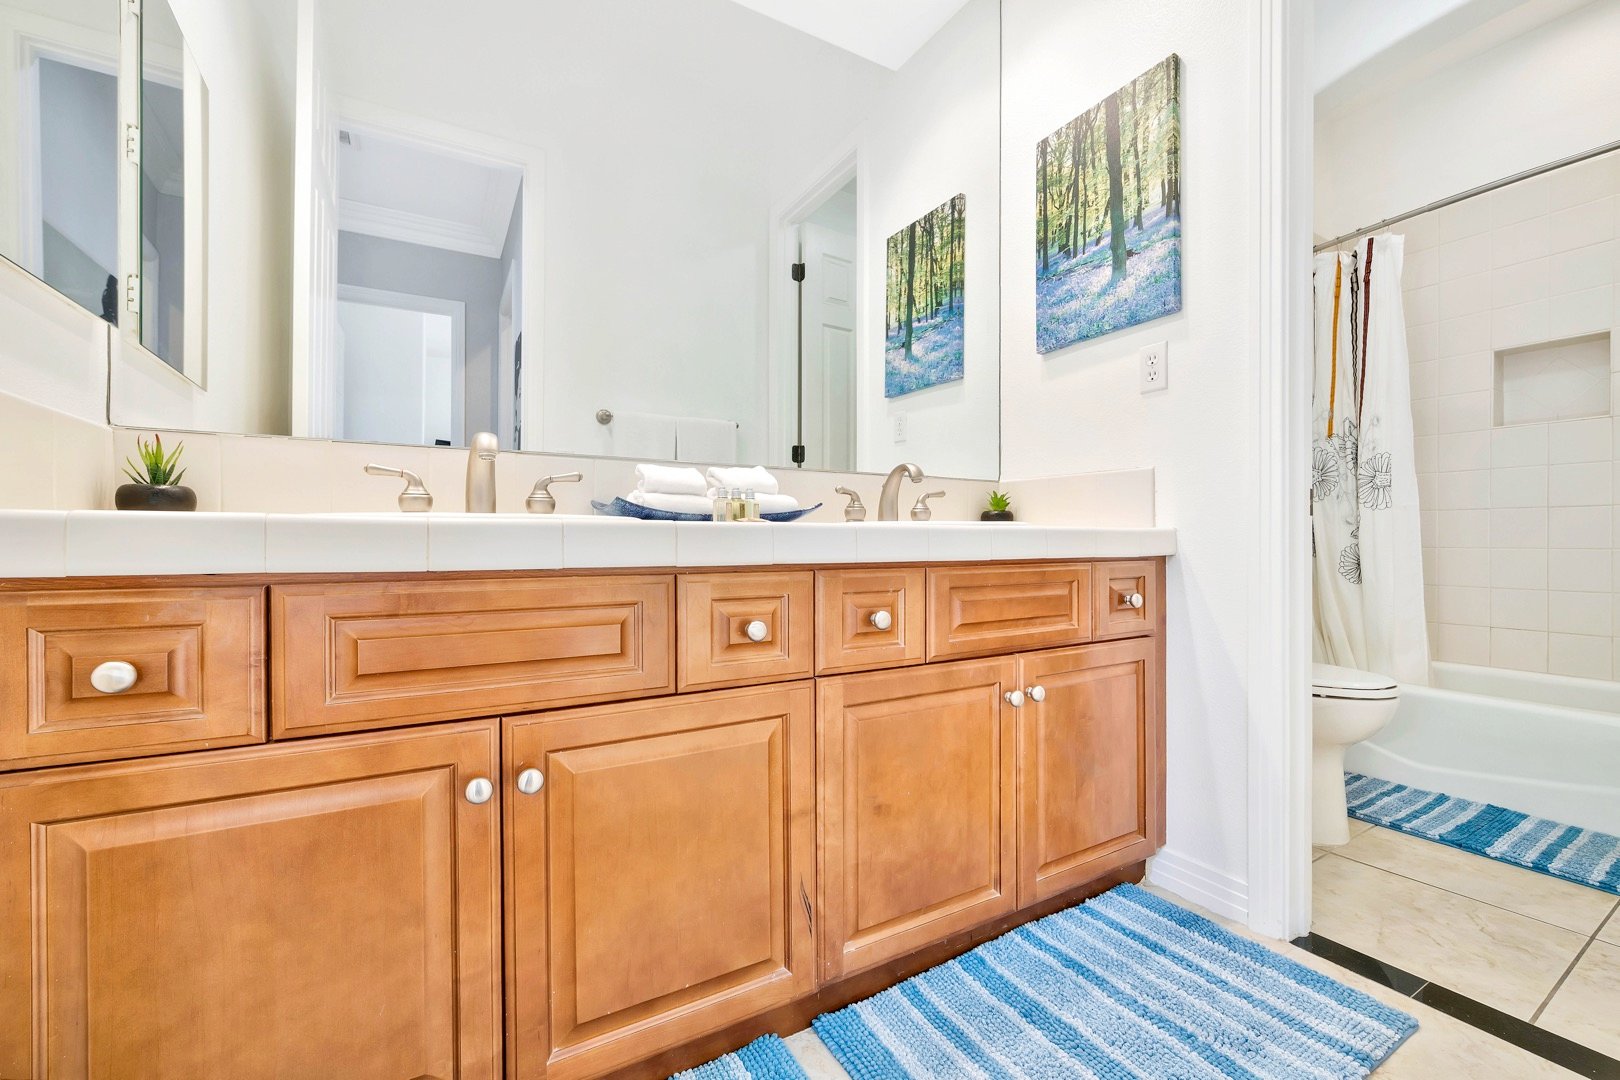 The hallway bathroom is across the hall from bedroom 5 and features a shower, bathtub combo and double-vanity sinks.